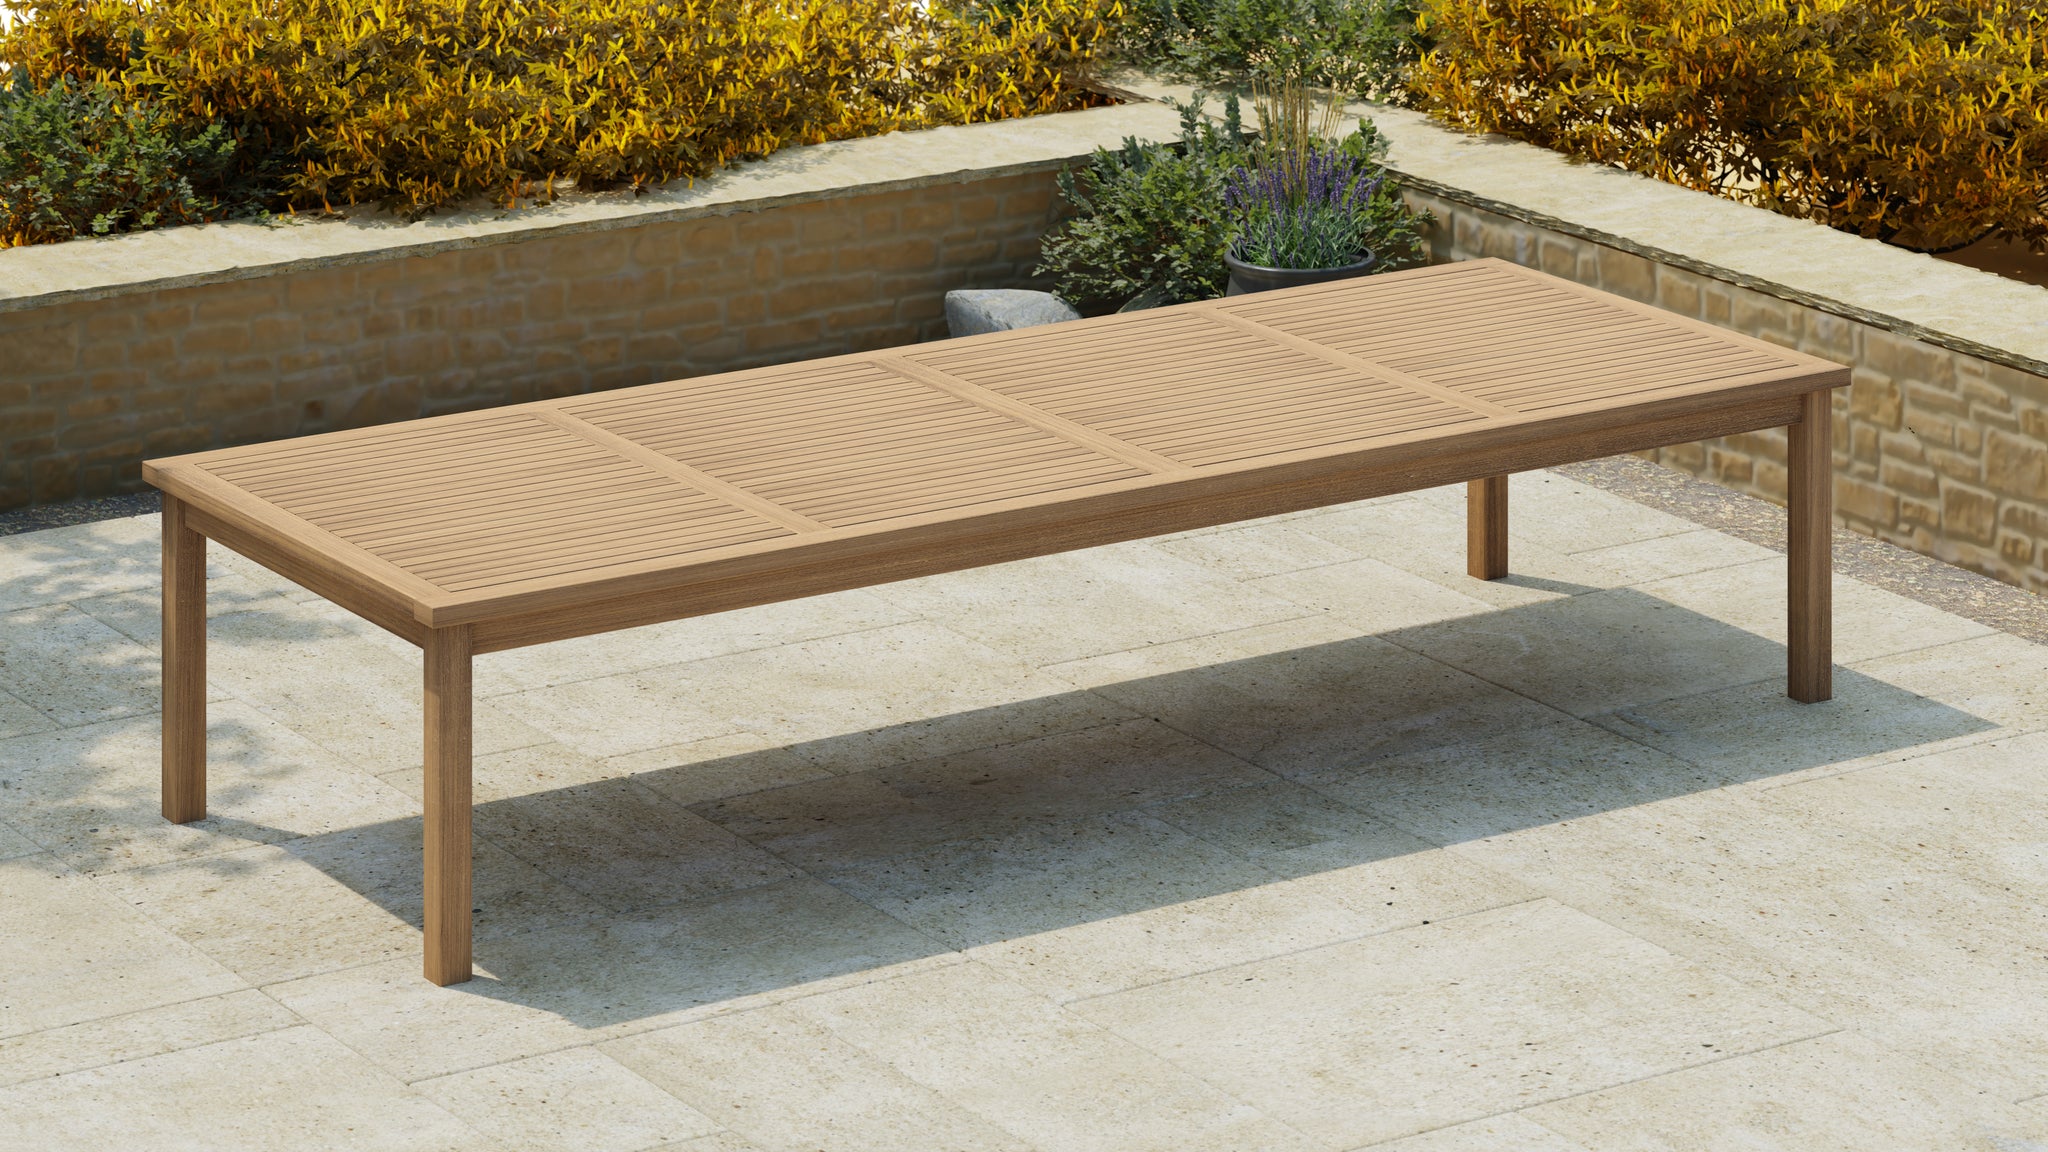 130x350cm Fixed Rectangular Table without Parasol Hole